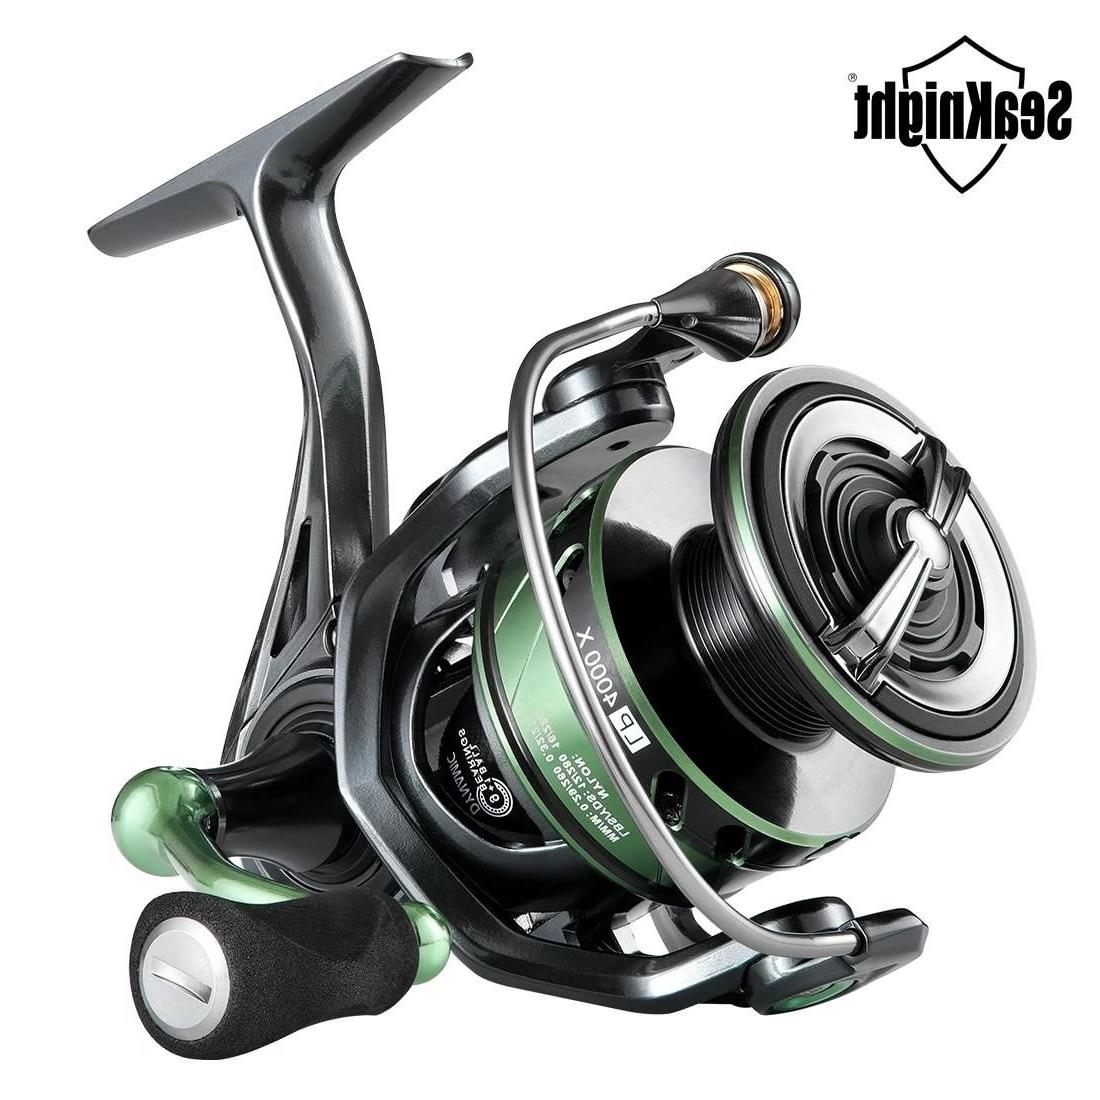 SeaKnight Brand WR III X Series Fishing Reels, 5.2:1 Durable Gear MAX Drag  28lb Smoother Winding Spinning Fishing Reel WR3 X NEW